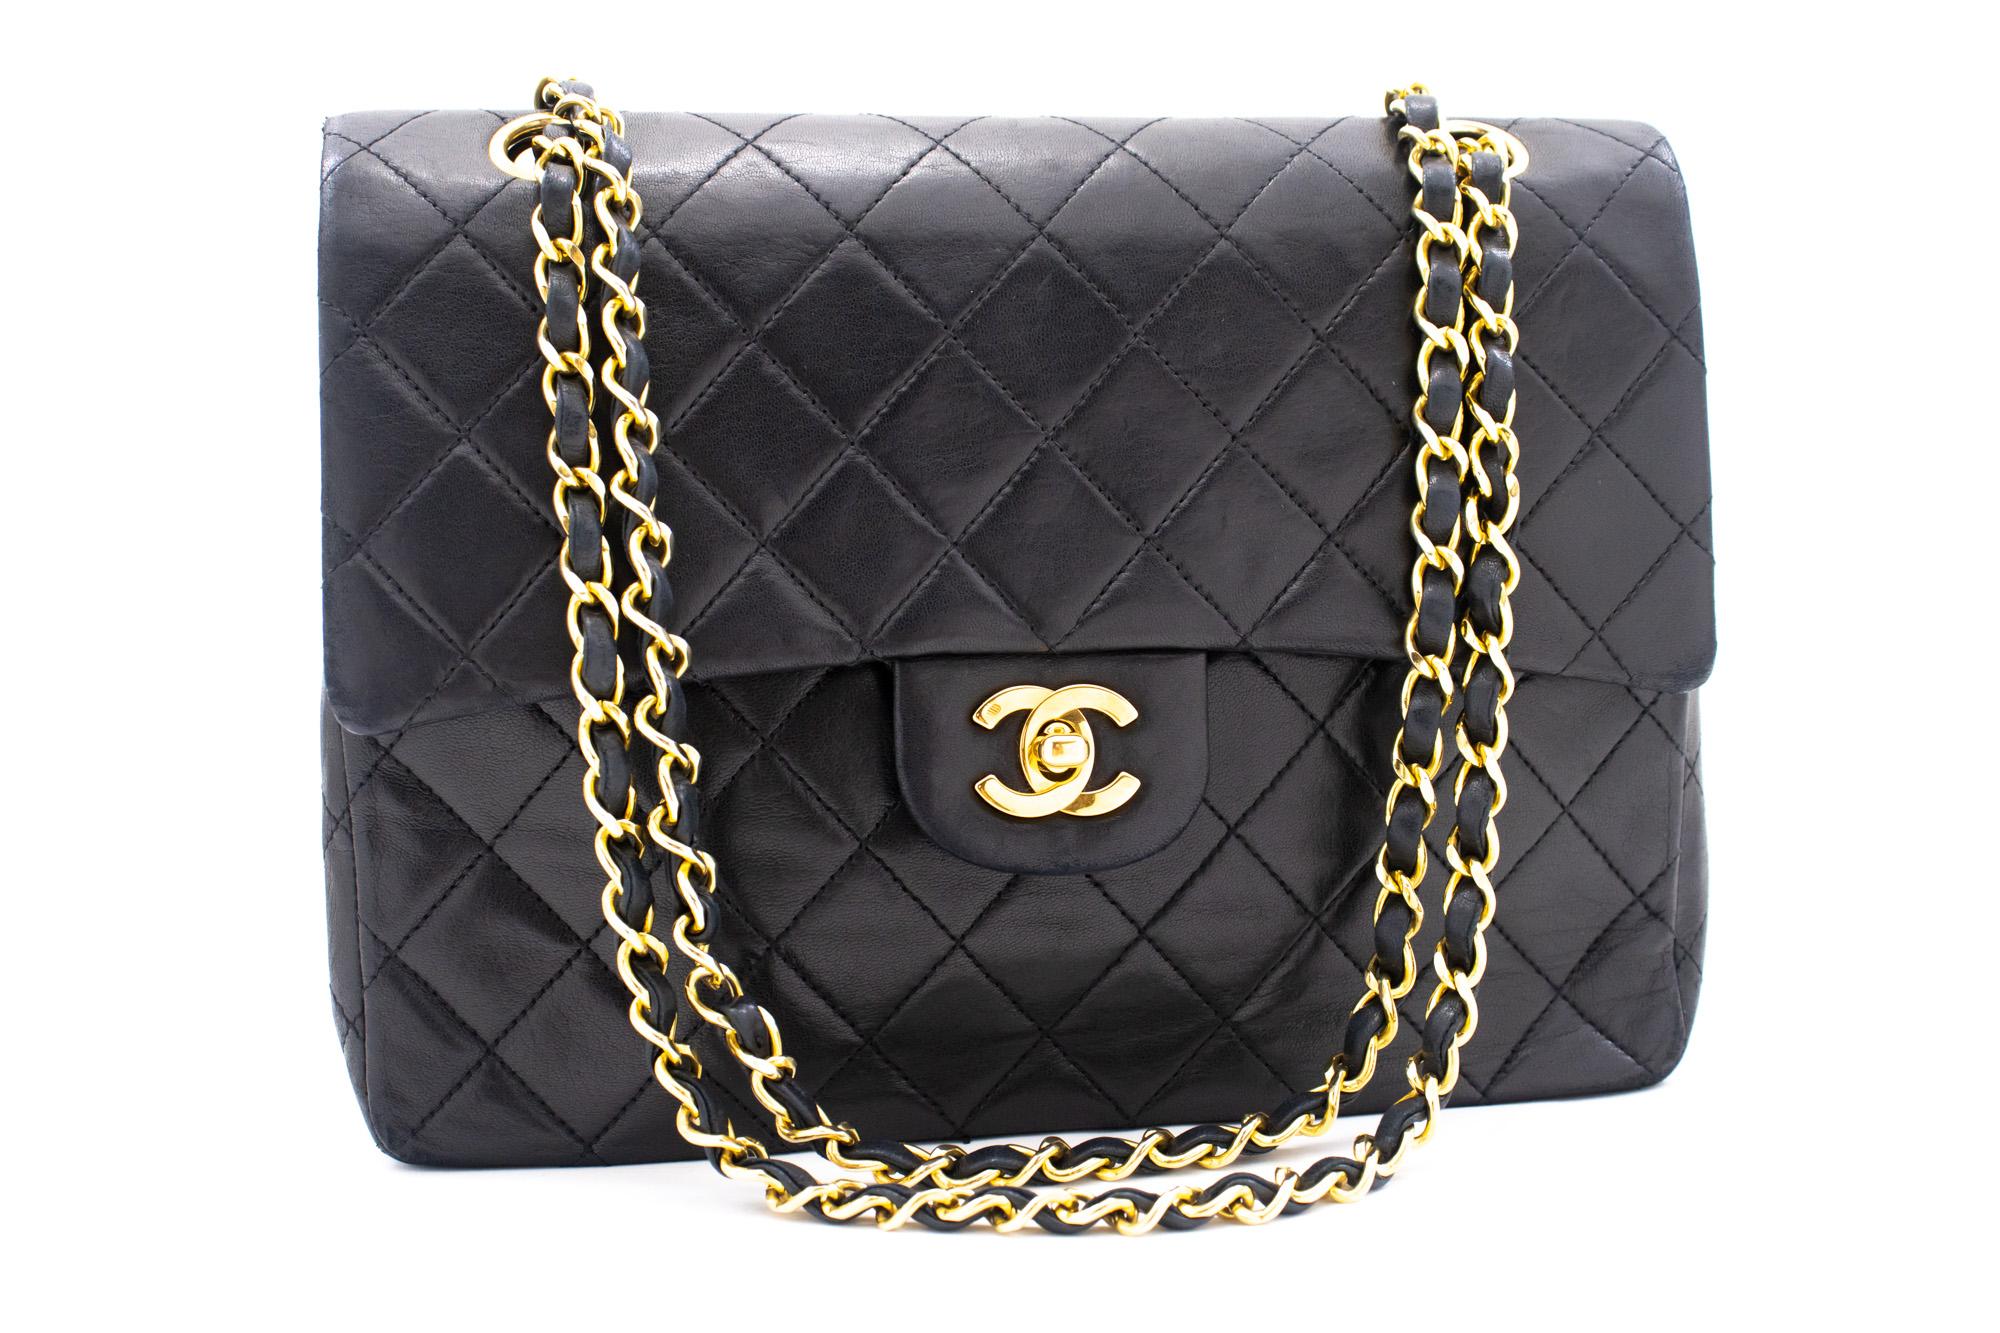 An authentic CHANEL Classic Double Flap Chain Shoulder Bag Black made of black Lambskin Purse. The color is Black. The outside material is Leather. The pattern is Solid. This item is Vintage / Classic. The year of manufacture would be